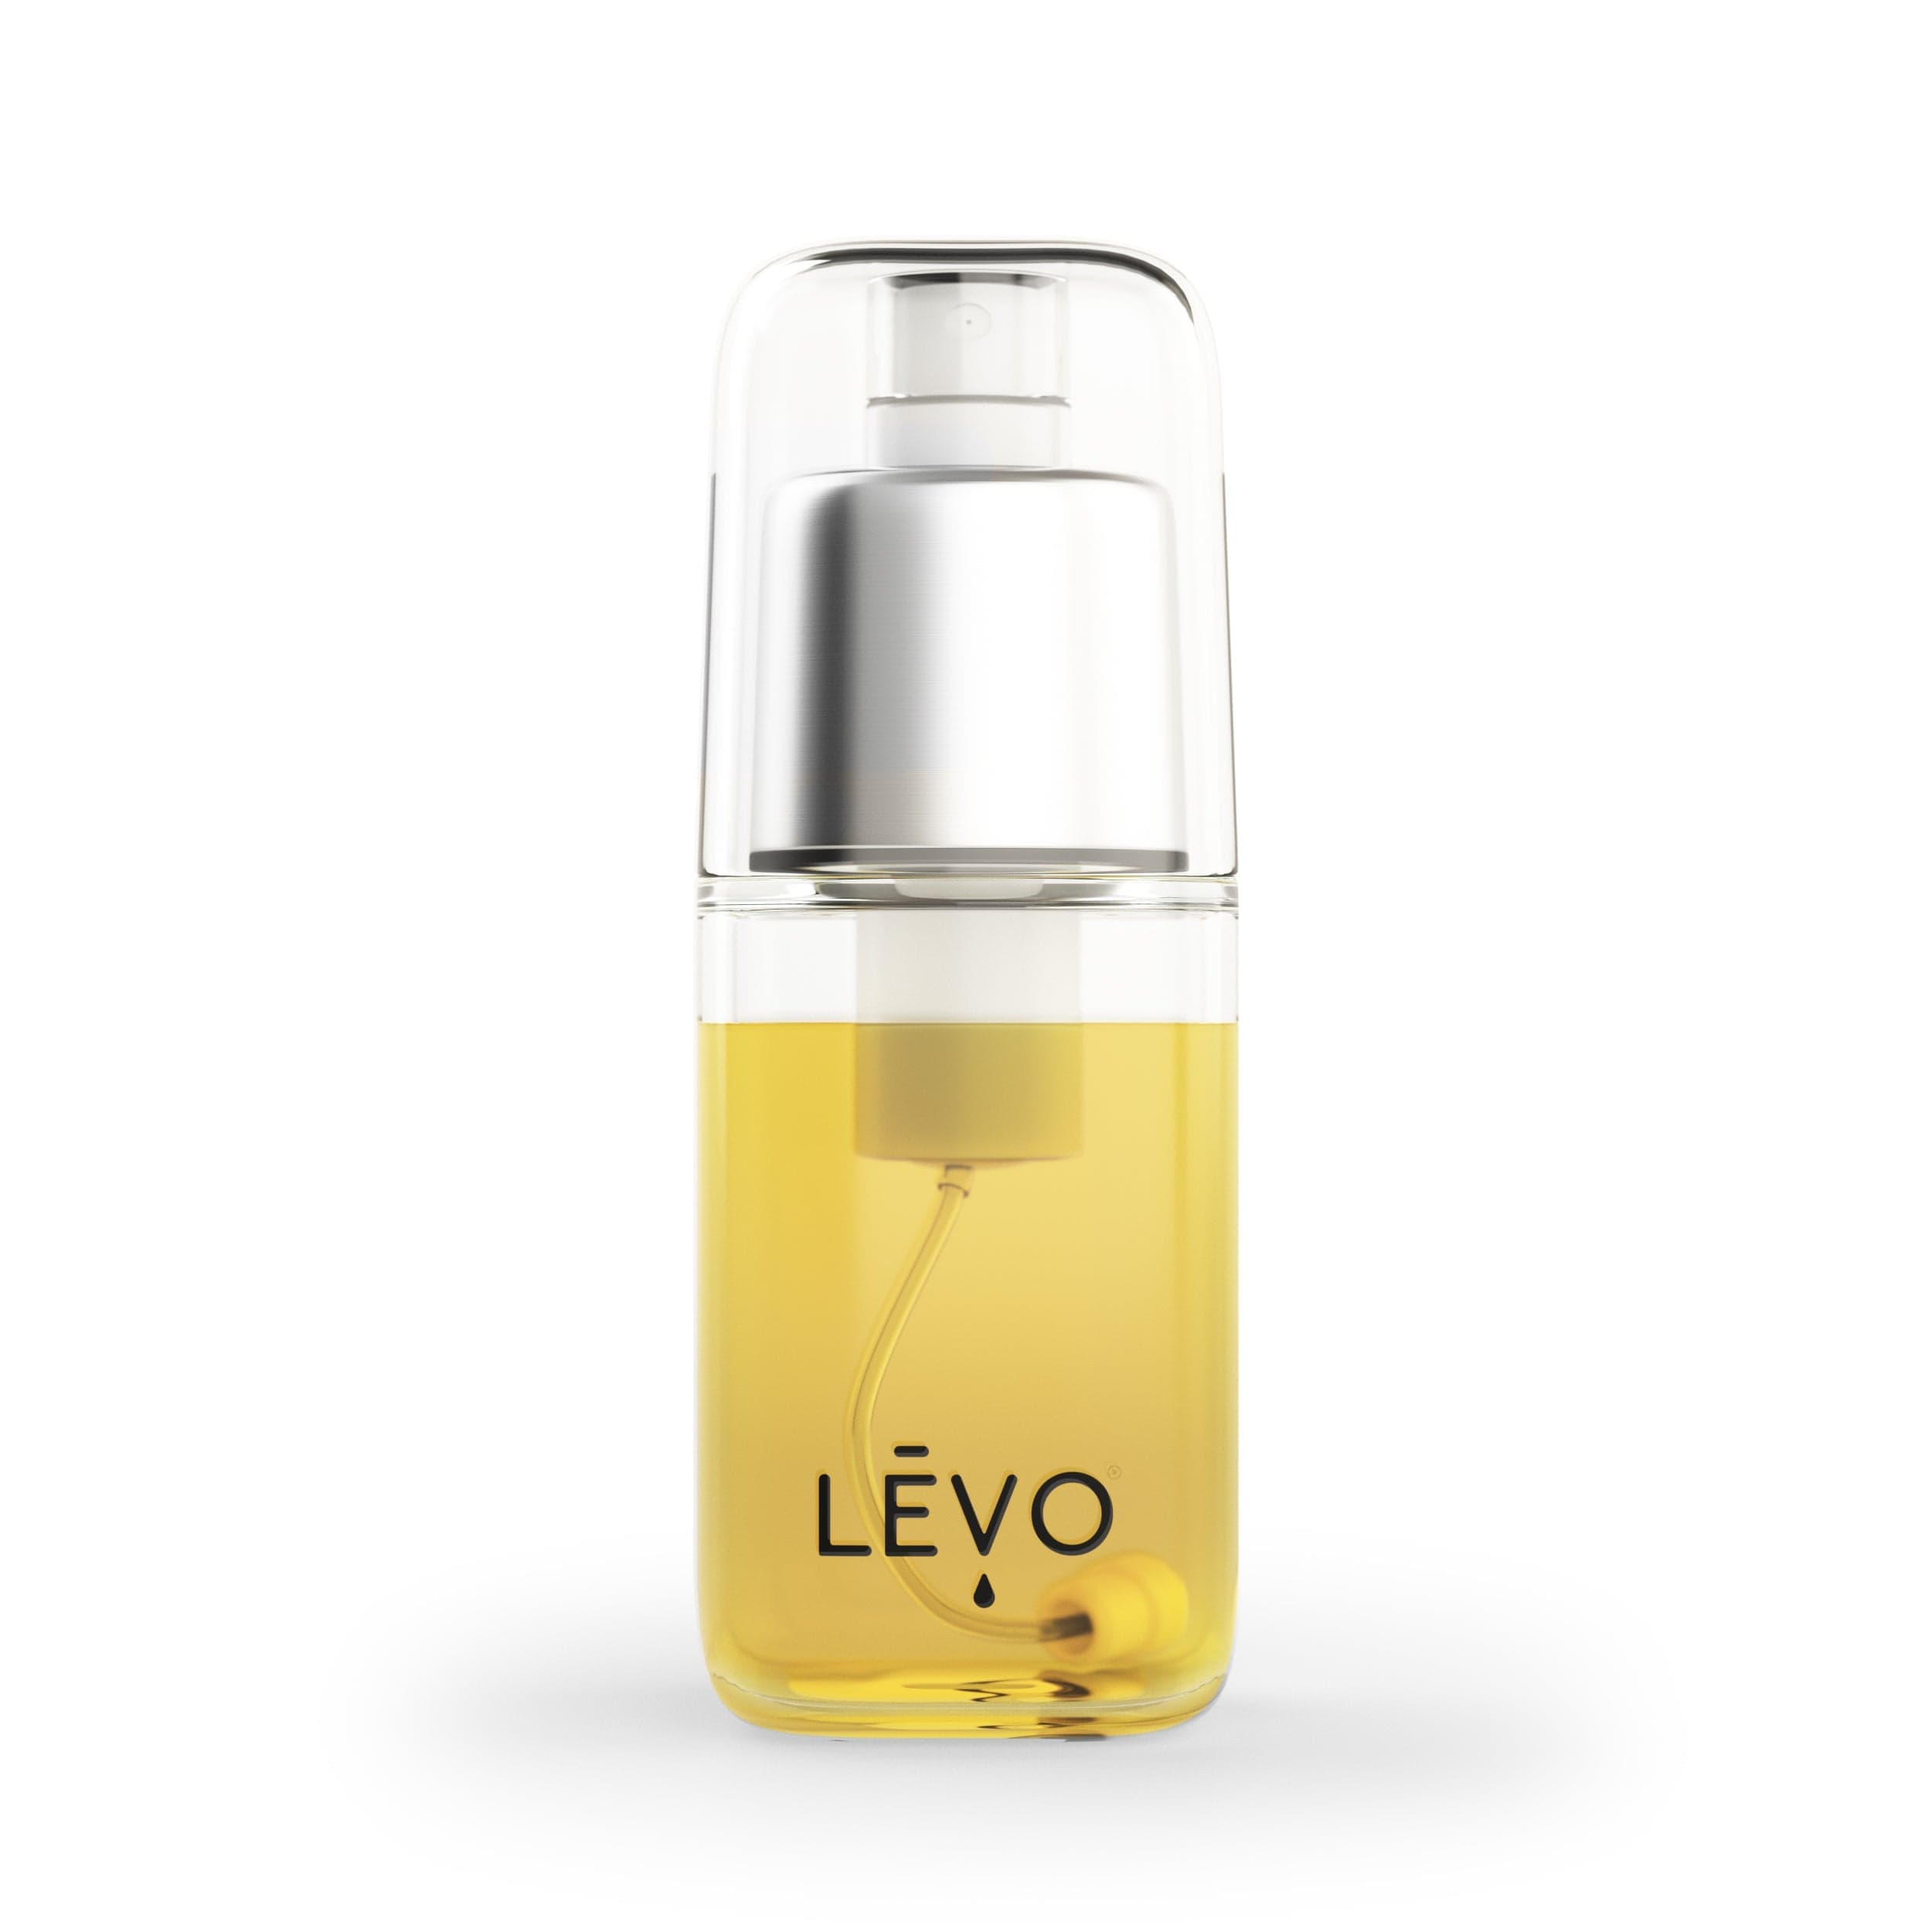 LEVO infusion sprayer to dispense infused oil